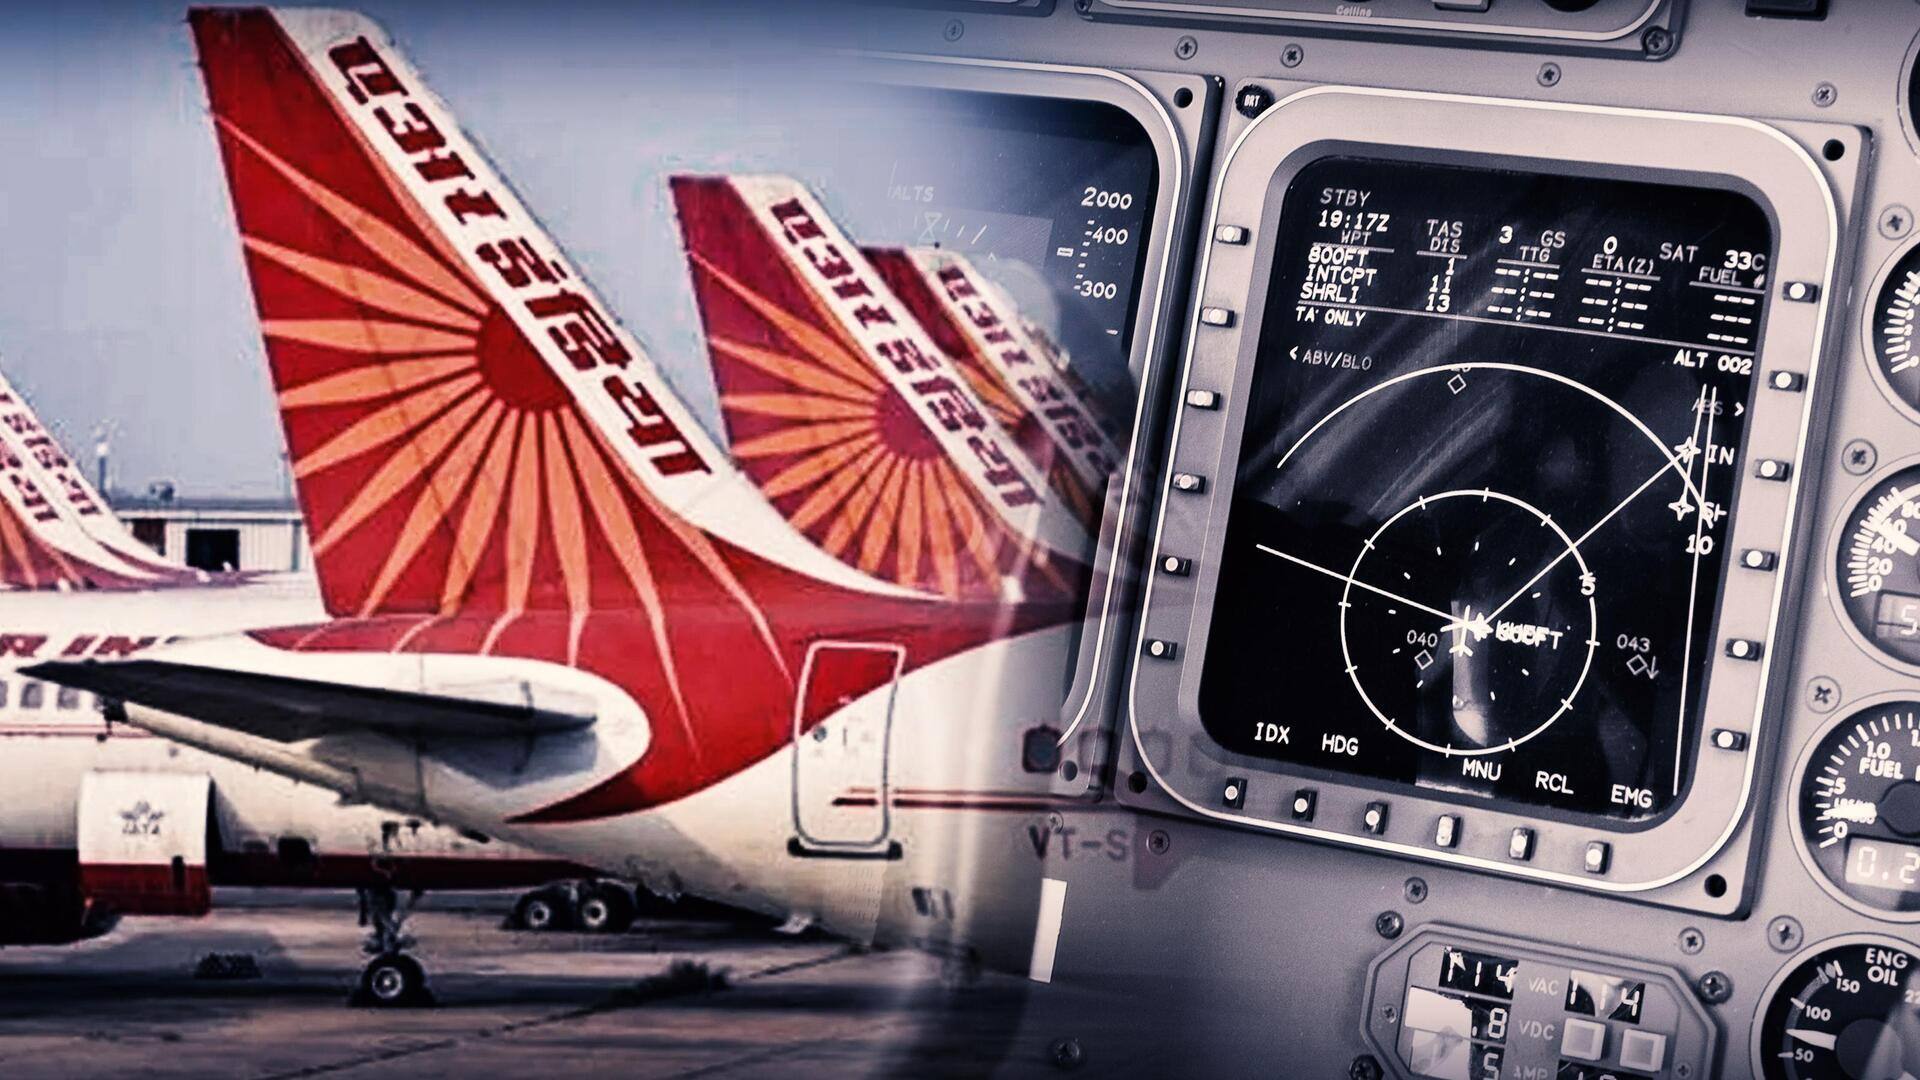 DGCA issues advisory to check GPS spoofing over Middle East